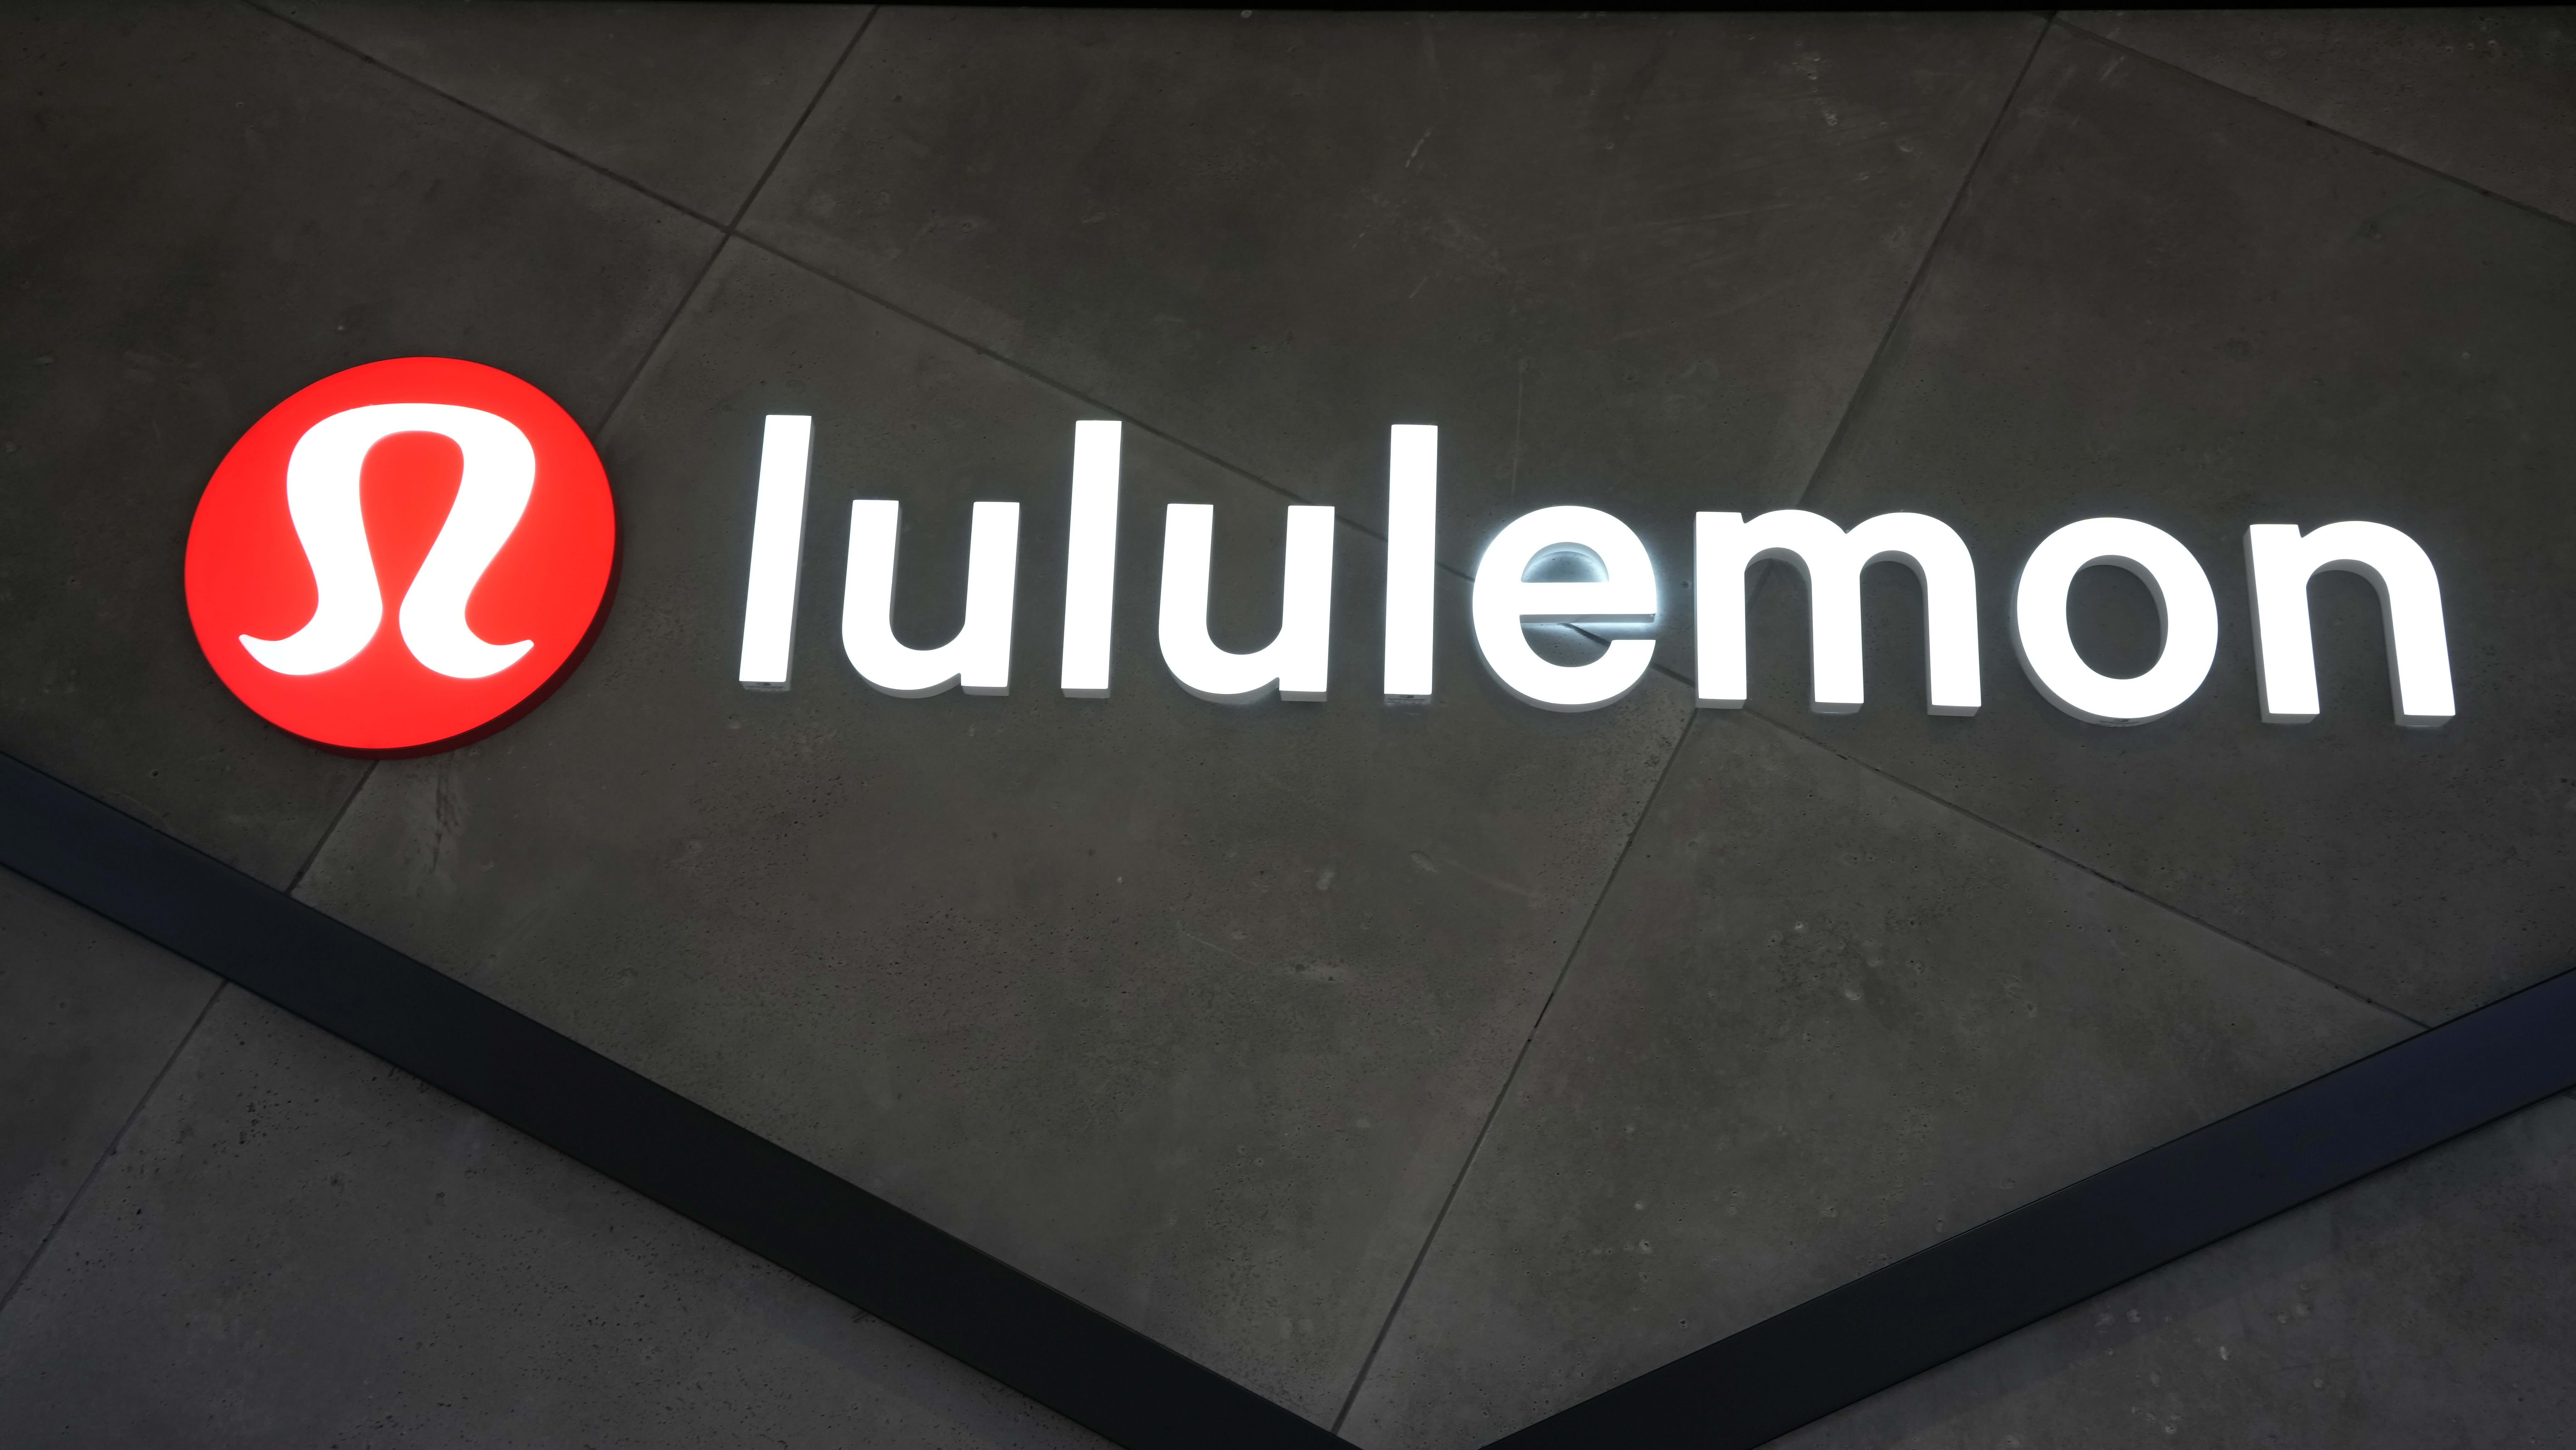 Lululemon Stock Jumps Ahead of Joining S&P 500